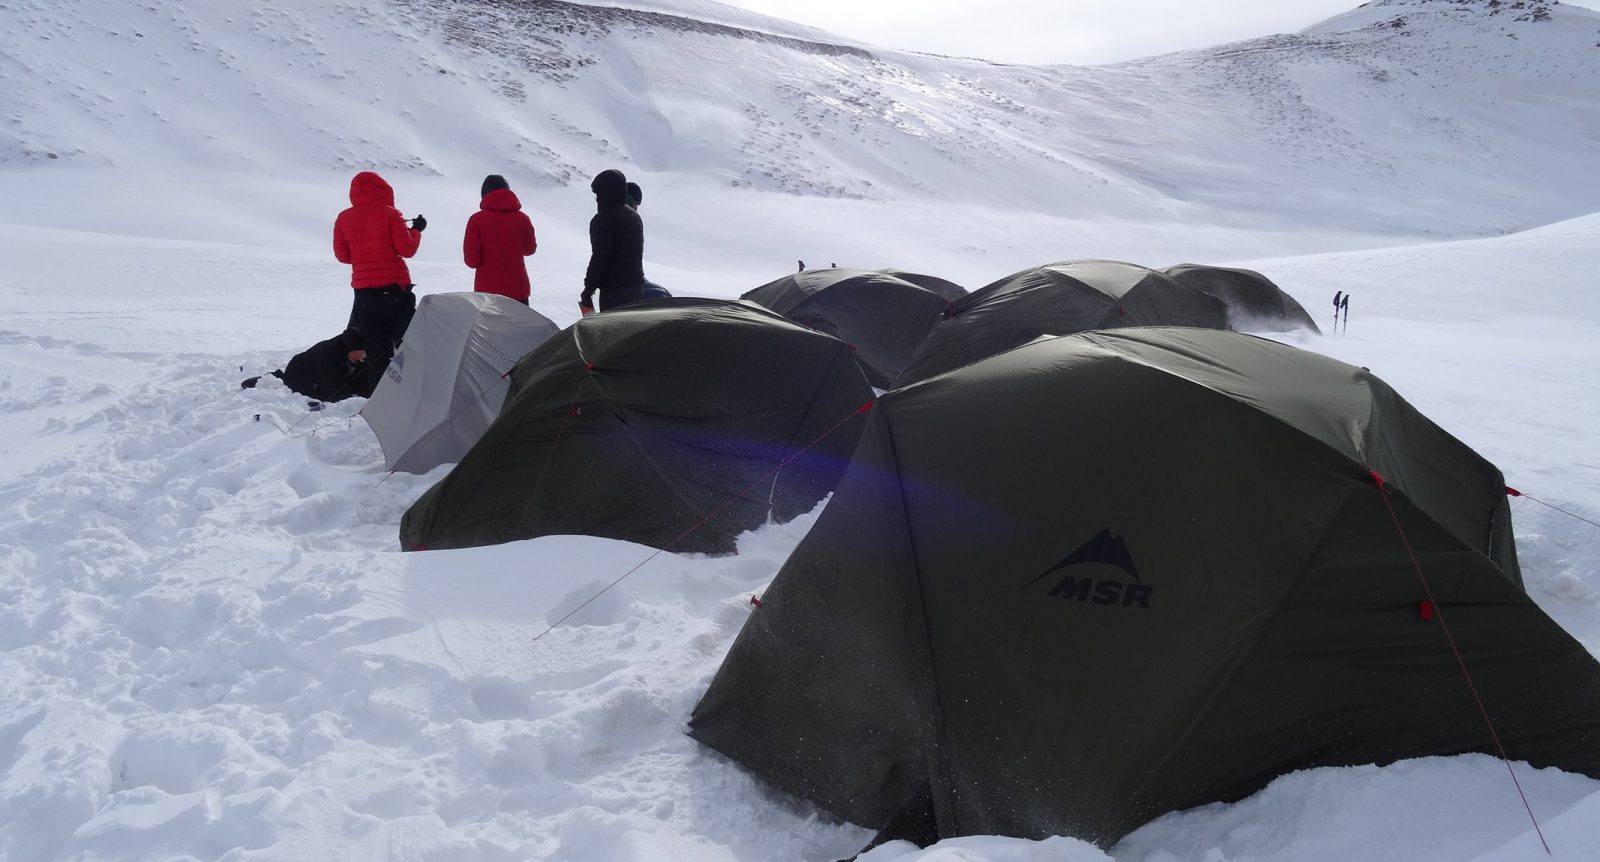 MSR tents in the Mount Halgurd region of the Zagros mountains in Iraqi Kurdistan on an expedition with (c) Secret Compass